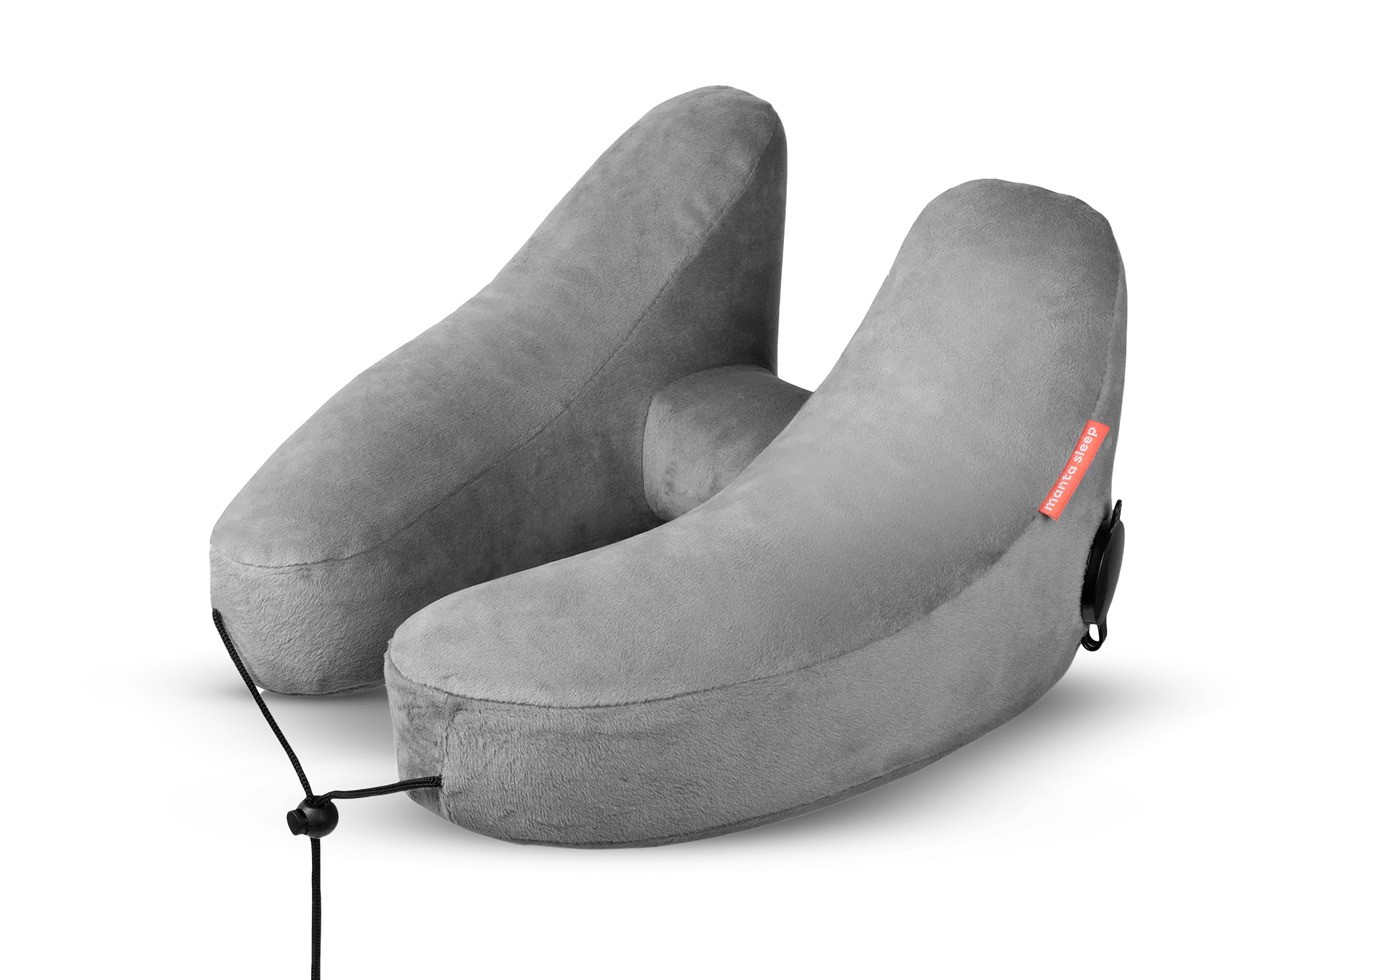 A gray travel pillow that can be used for car camping.